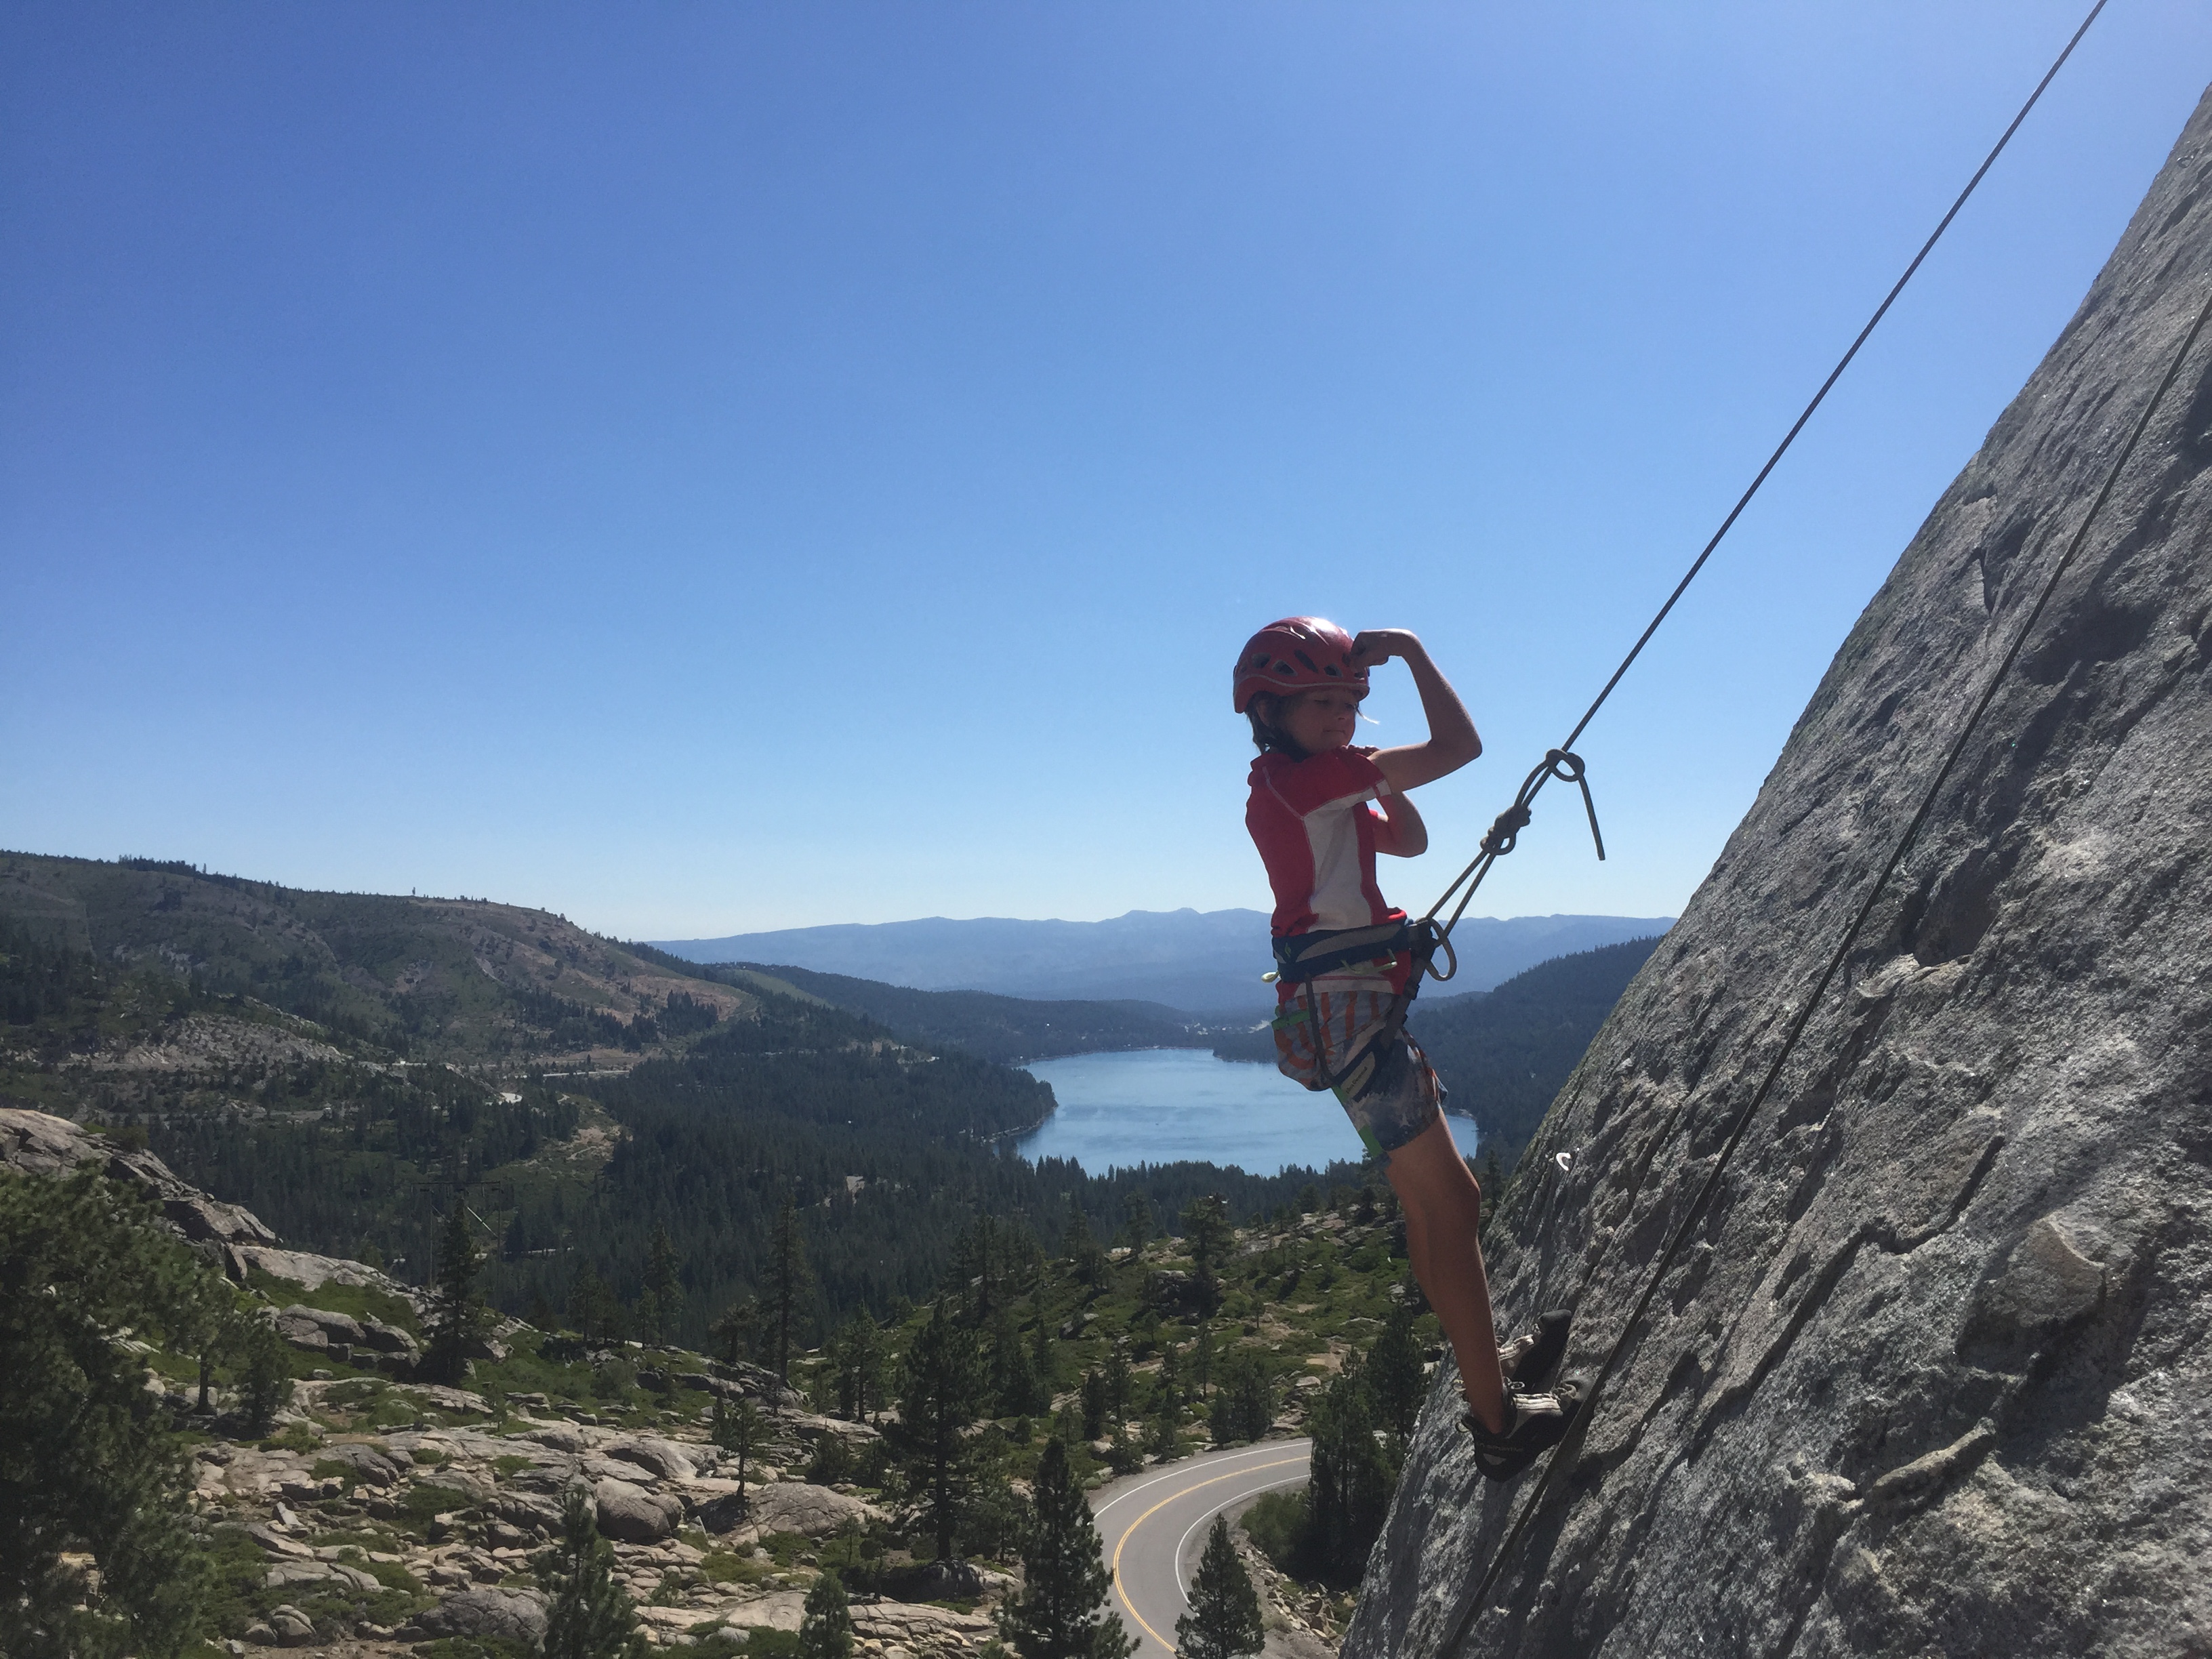 Rock Climbing Camp is one of TEA's Tahoe Summer Camps